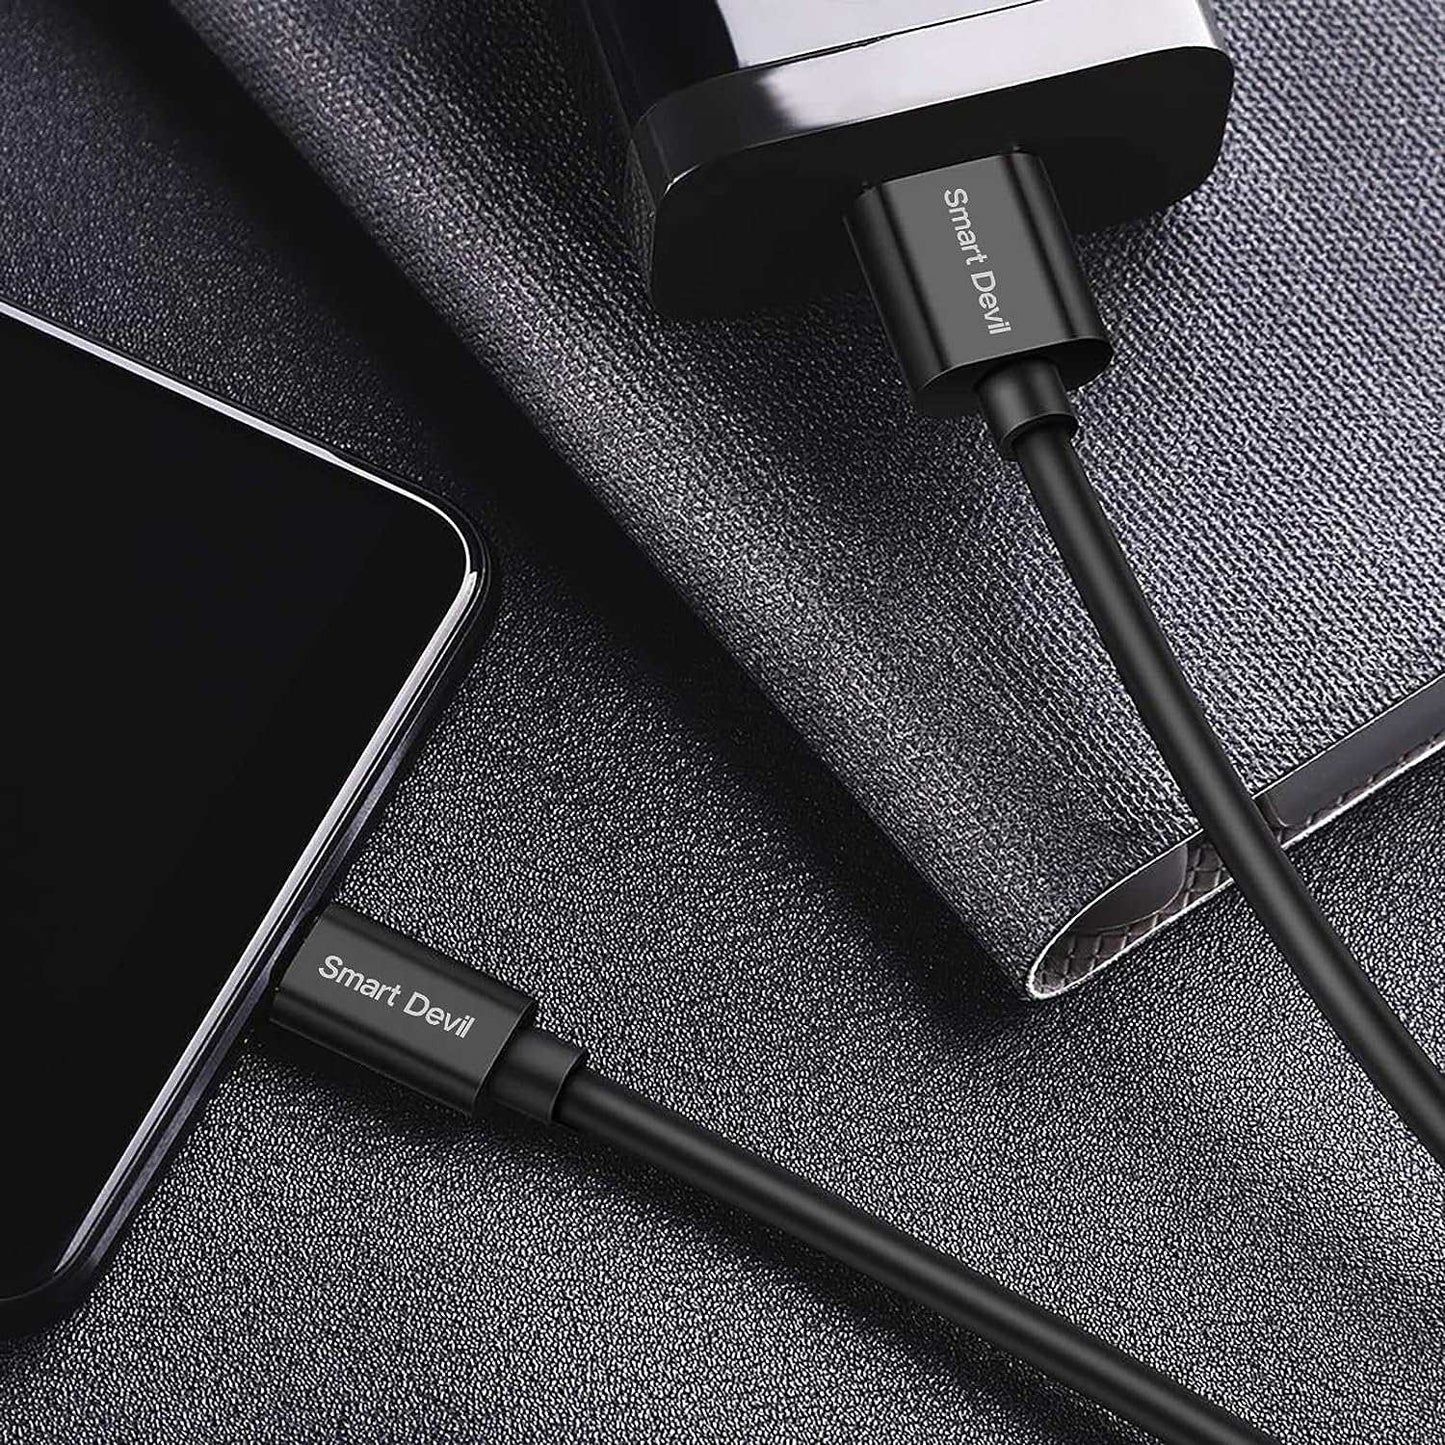 Smart Devil USB Type C Cable,USB A to USB C Charger 2-Pack(5ft & 6.6ft) Fast Charging Cord for Samsung Galaxy S9 S8 S8+,Galaxy Note 8, MacBook, LG V30 V20 G5 G6, Nexus 6P 5X, Nintendo Switch,and More